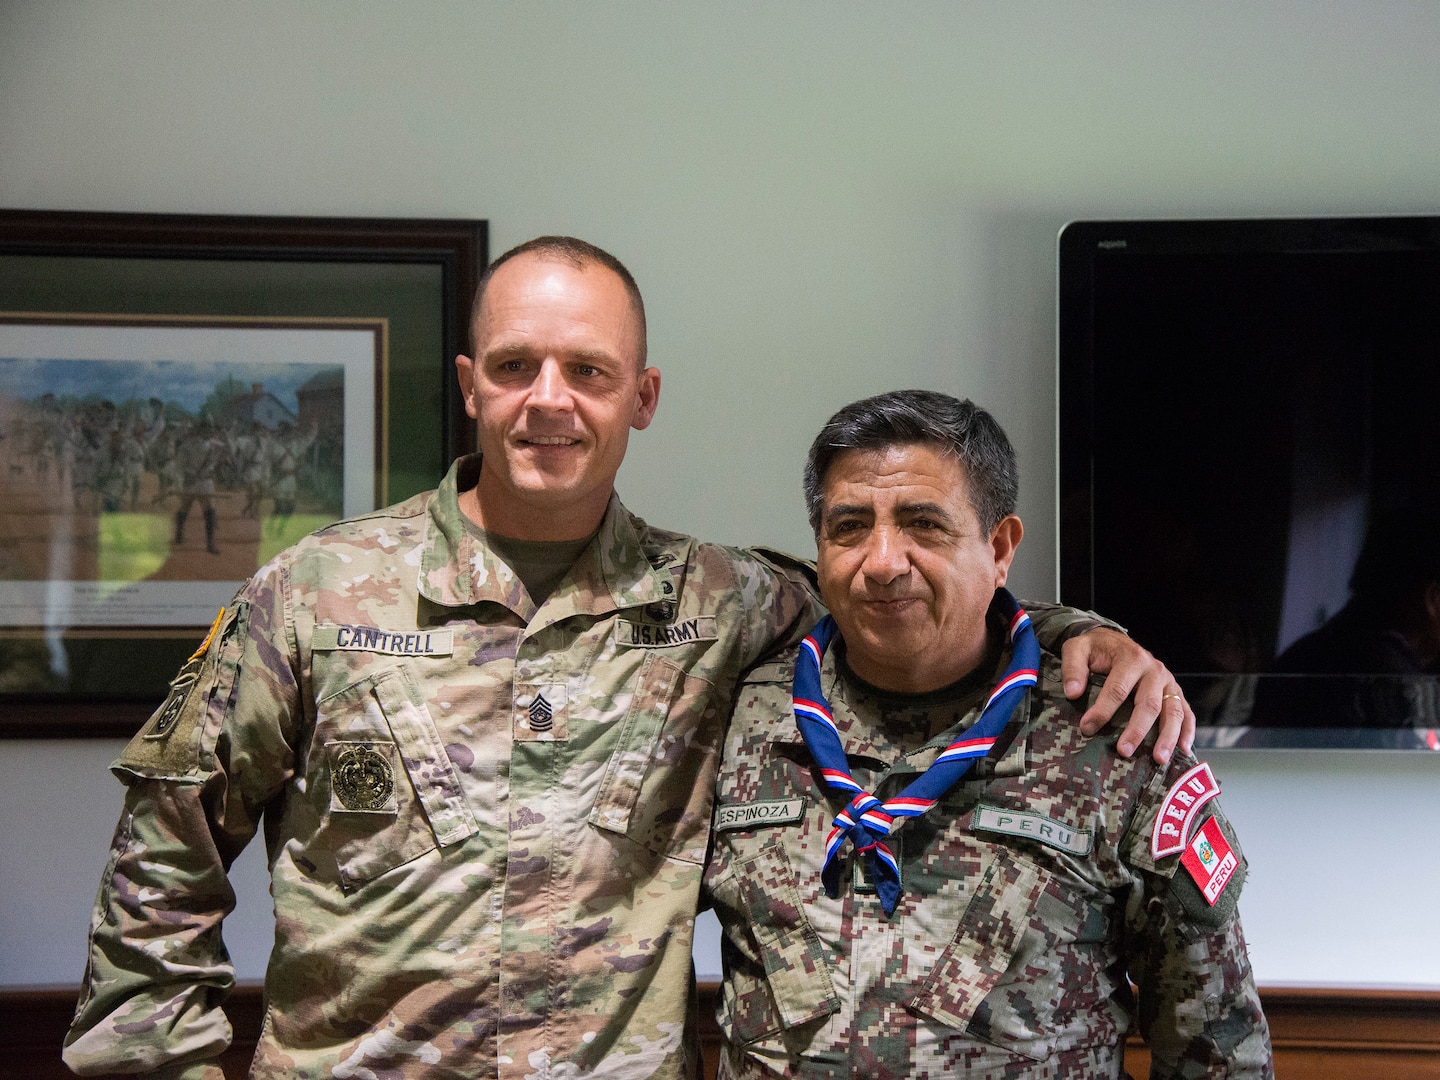 West Virginia Army National Guard Command Sgt. Maj. Phillip Cantrell poses for a photo with Técnico Jefe Superior Pedro Espinoza, sergeant major of the Peruvian army Aug. 16, 2018, at the West Virginia National Guard Joint Force Headquarters in Charleston, West Virginia.